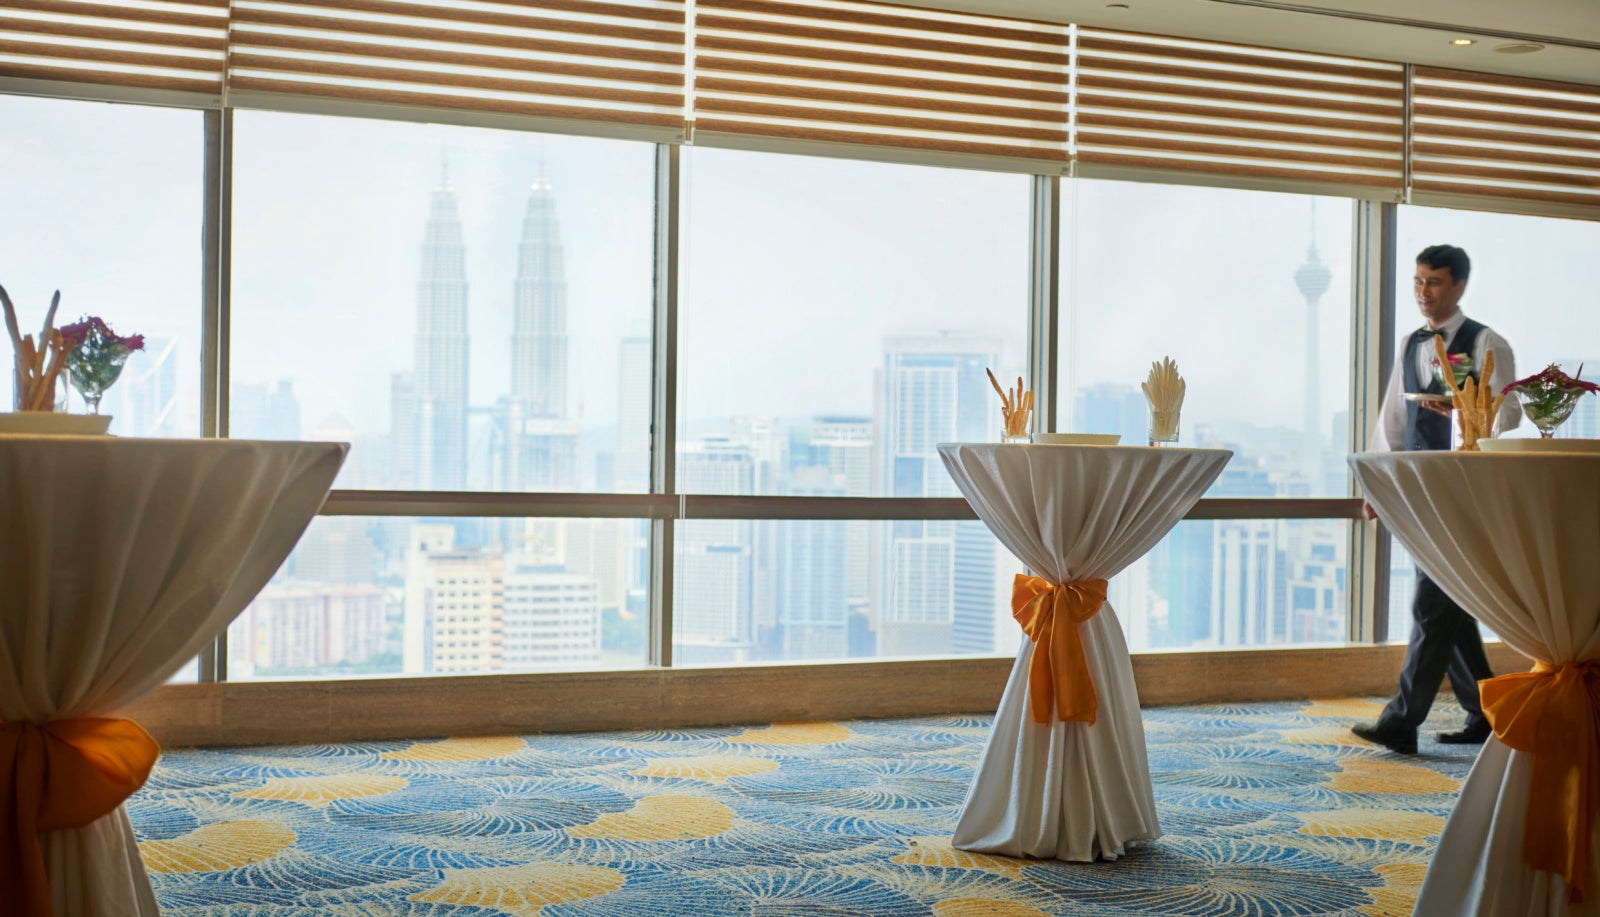 Hosting an Event? Here Are X M’sian Places You NEED to Know That Are Perfect For Any Occasion! - WORLD OF BUZZ 7